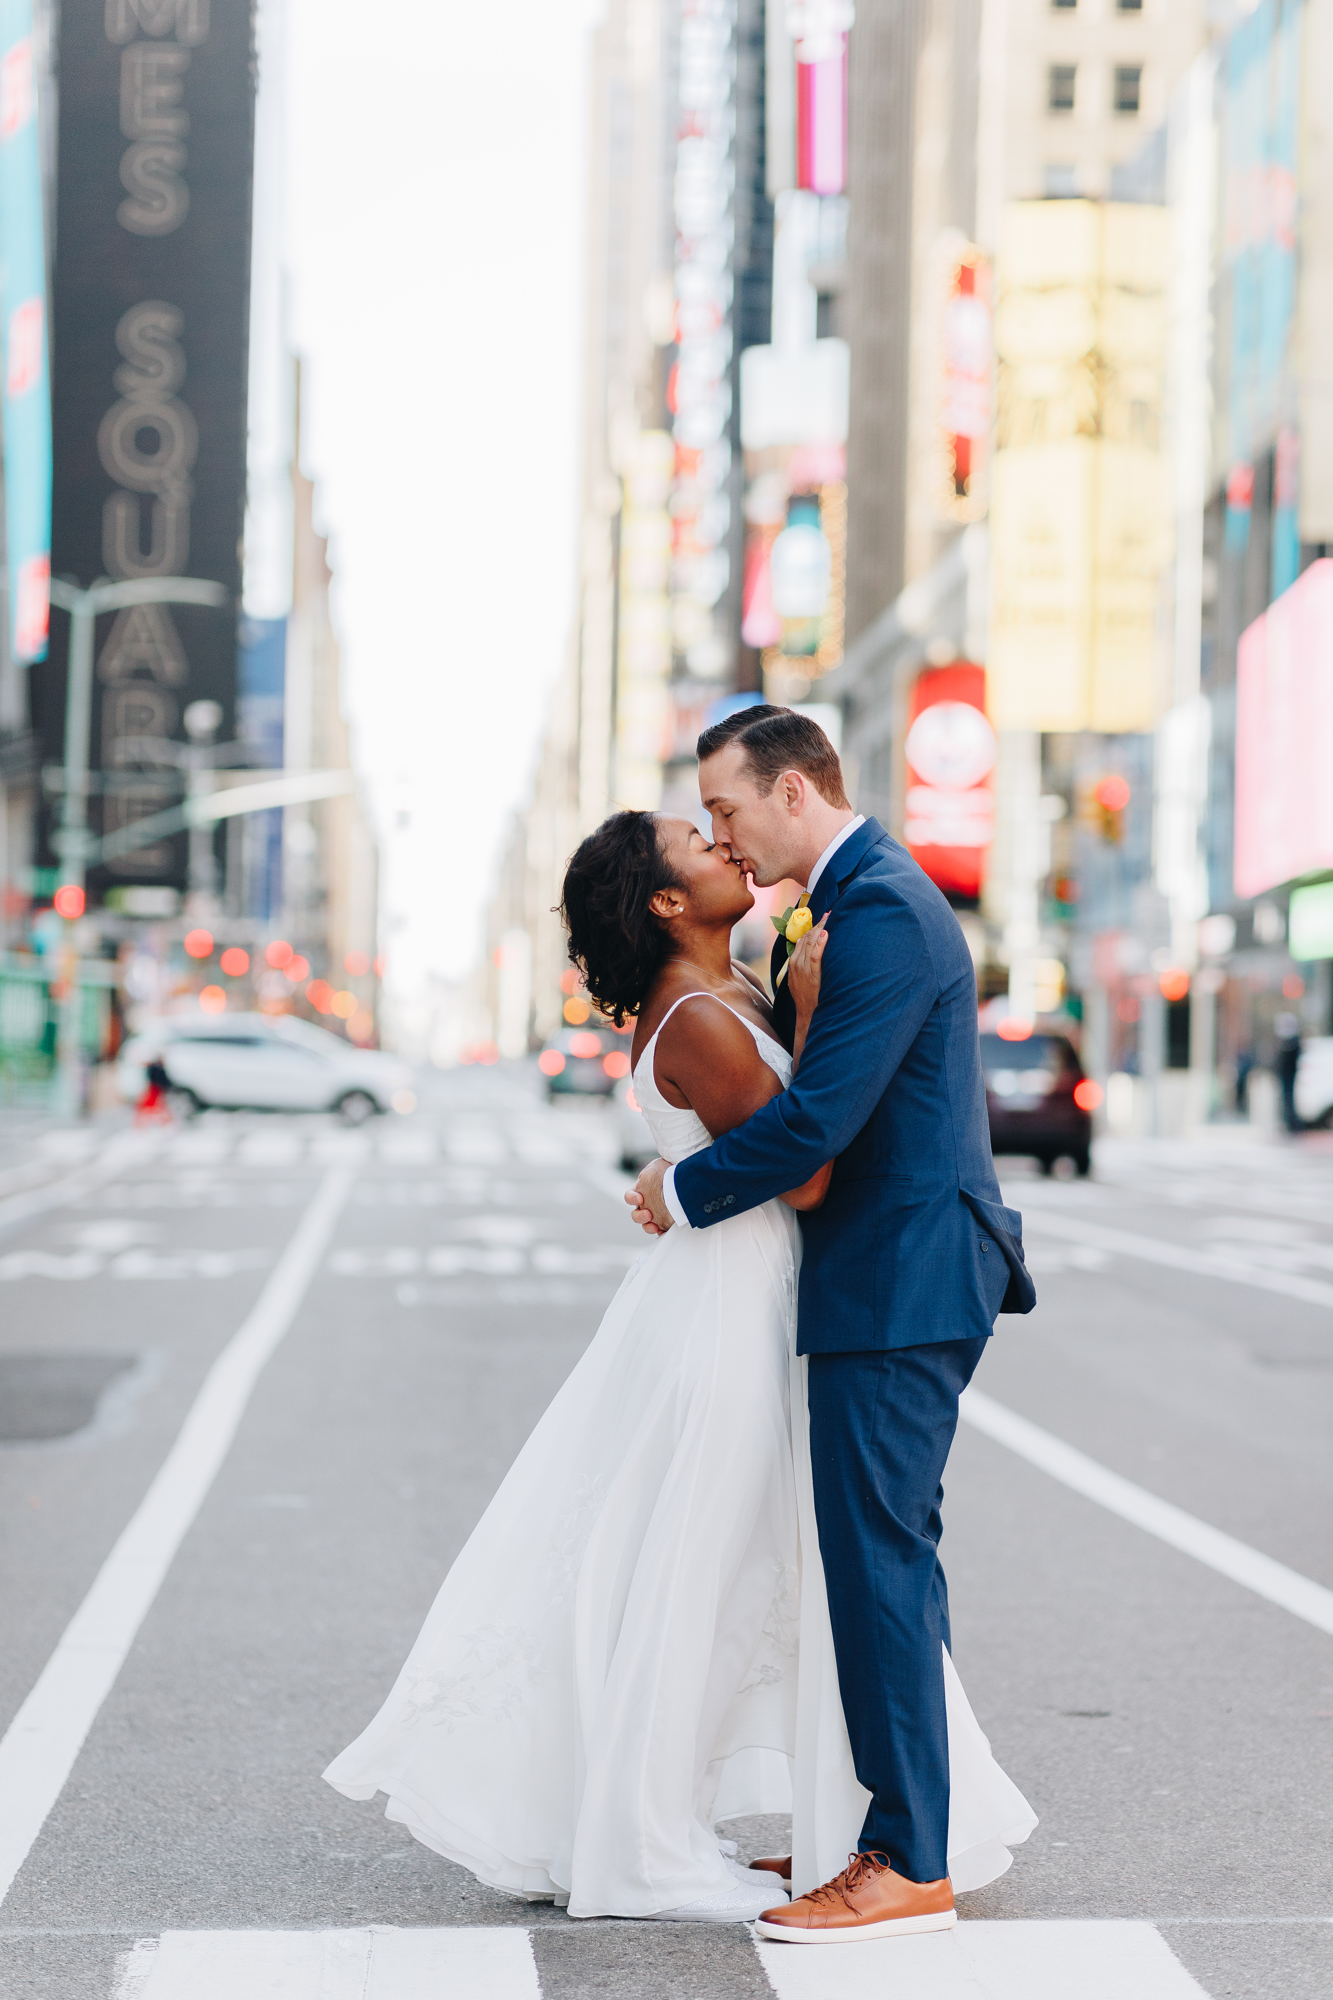 Inspirational Times Square Wedding Photos in NYC